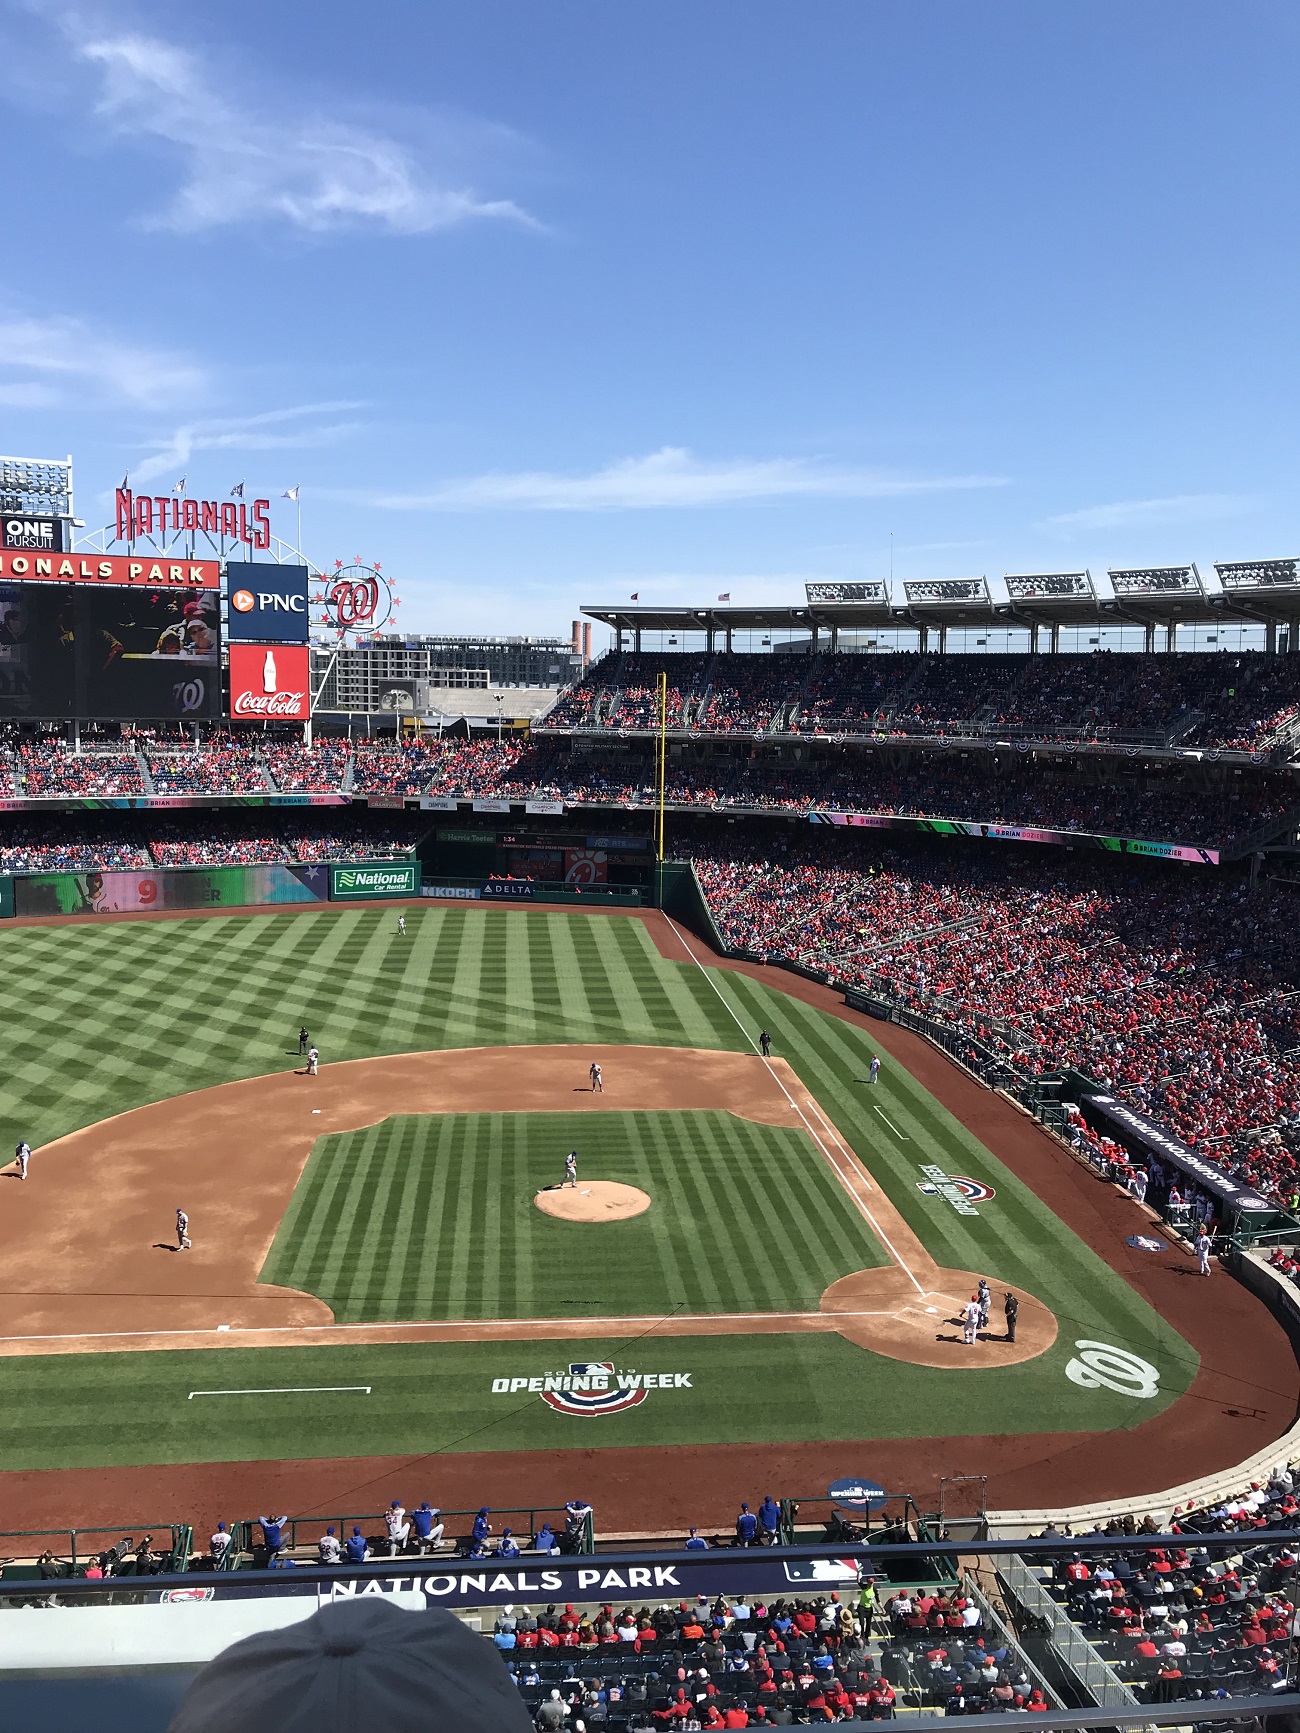 Nationals Park Opening Day 2019